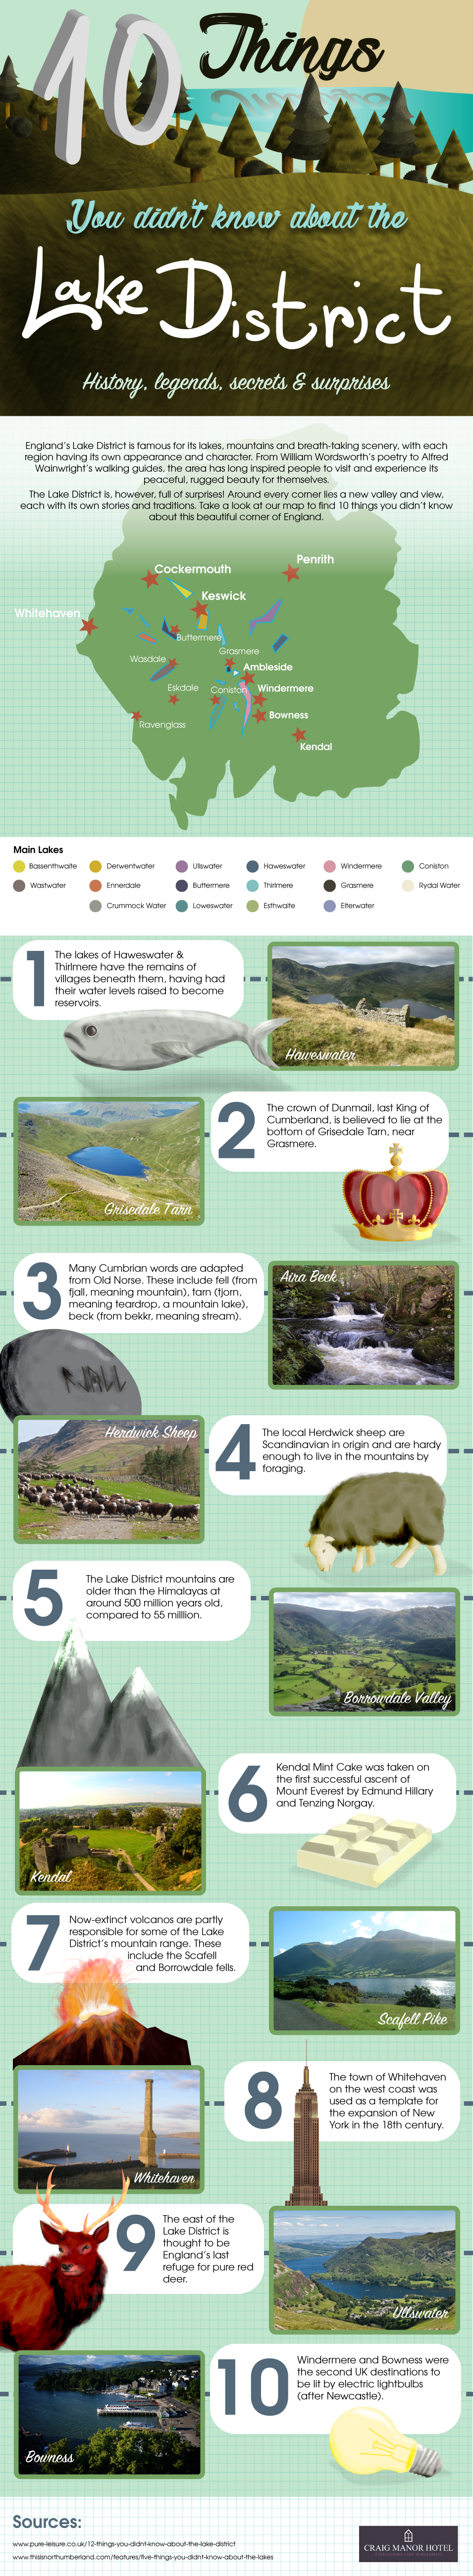 10 Things You Didn’t Know About The Lake District